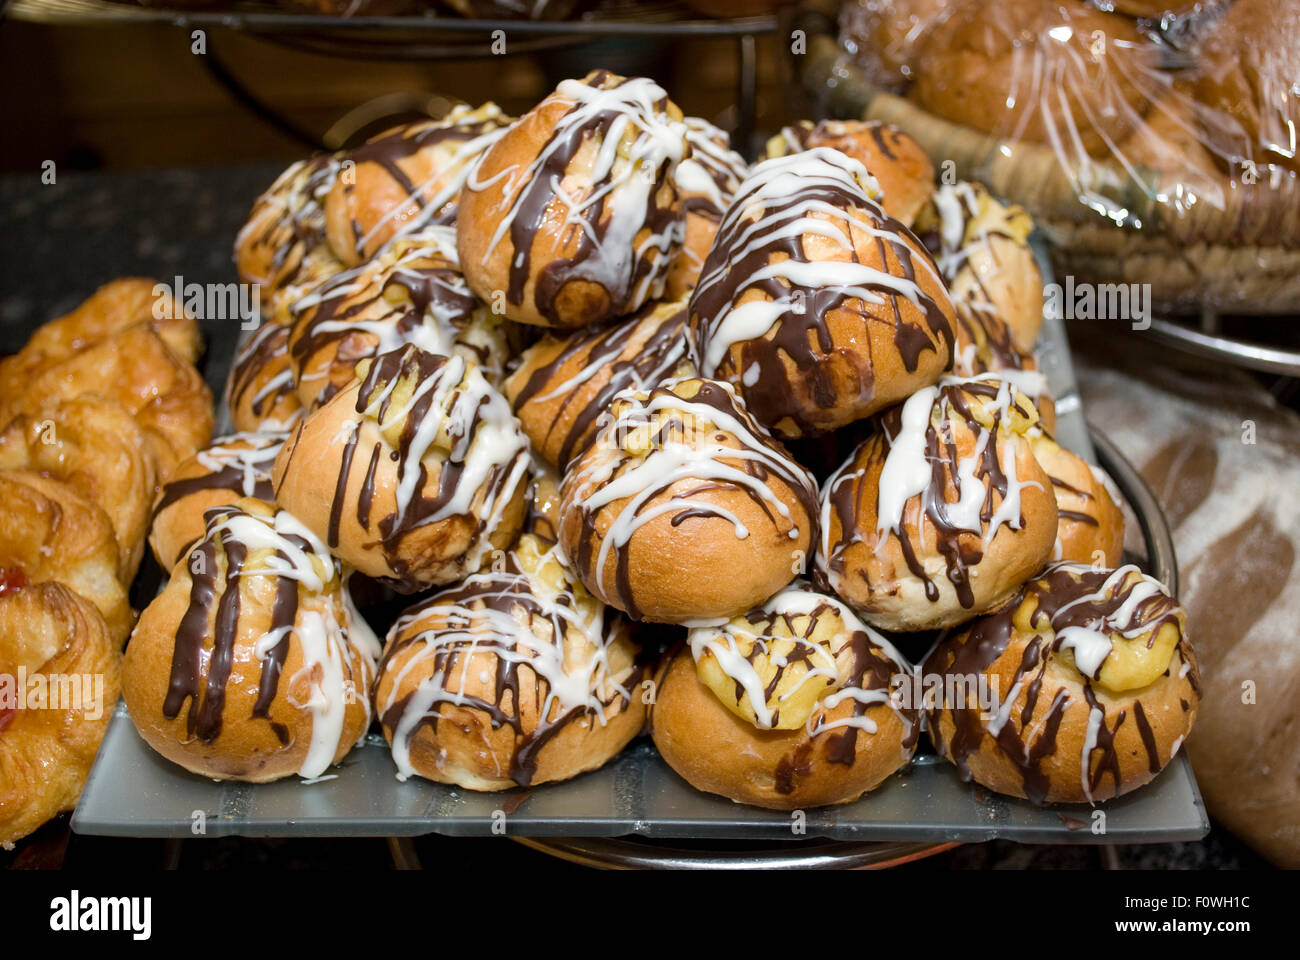 Breakfast pastries on a cruise ship on the Nile River, Egypt. Stock Photo